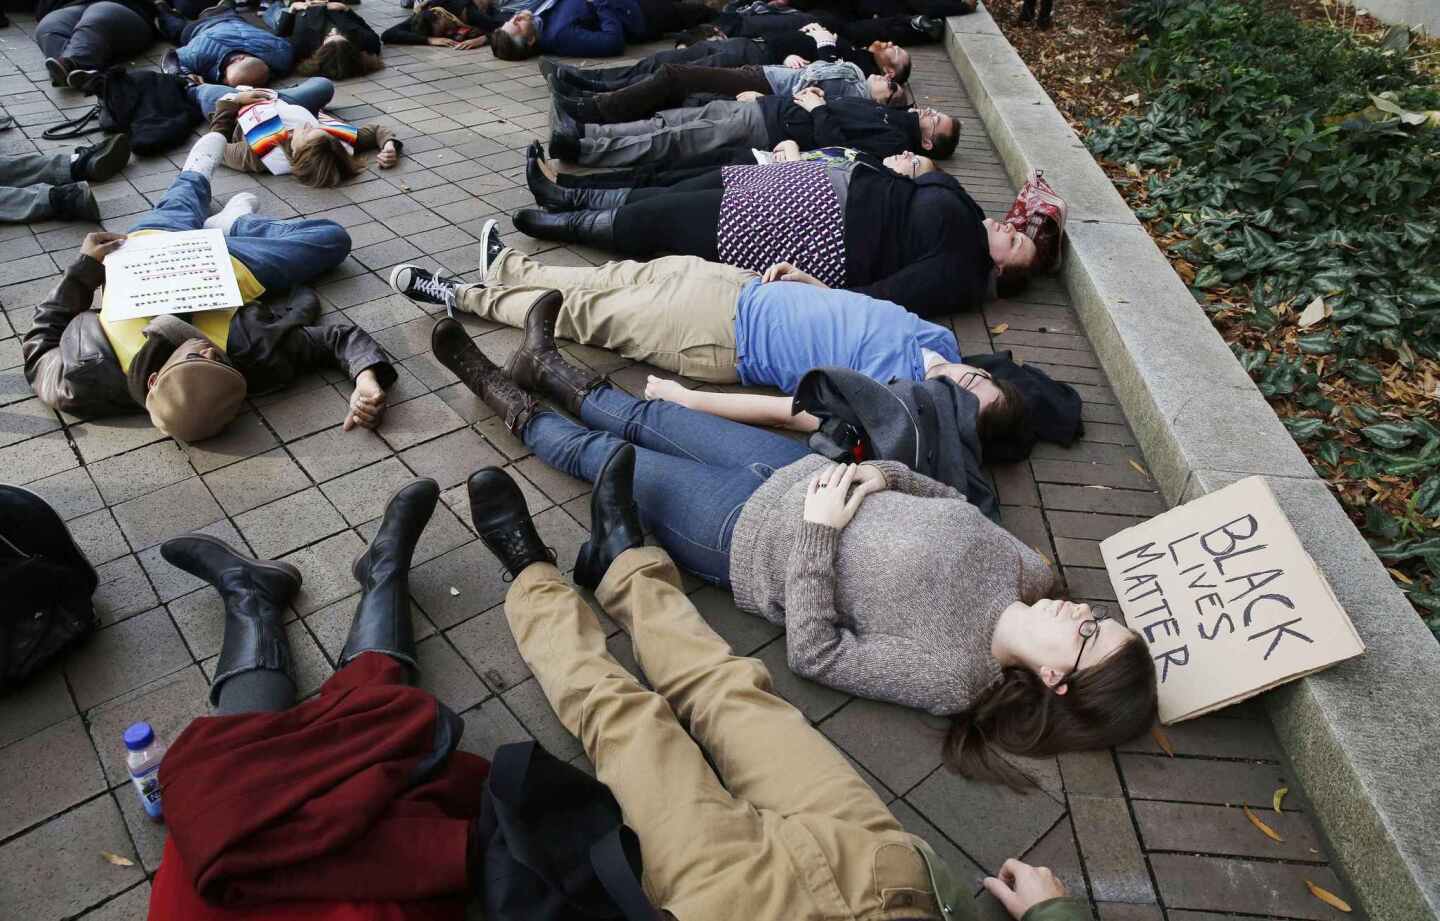 Demonstrators stage a "die-in" outside the Justice Department in Washington, D.C., to protest the grand jury's exoneration of Ferguson, Mo., police Officer Darren Wilson in the shooting death of Michael Brown, 18.